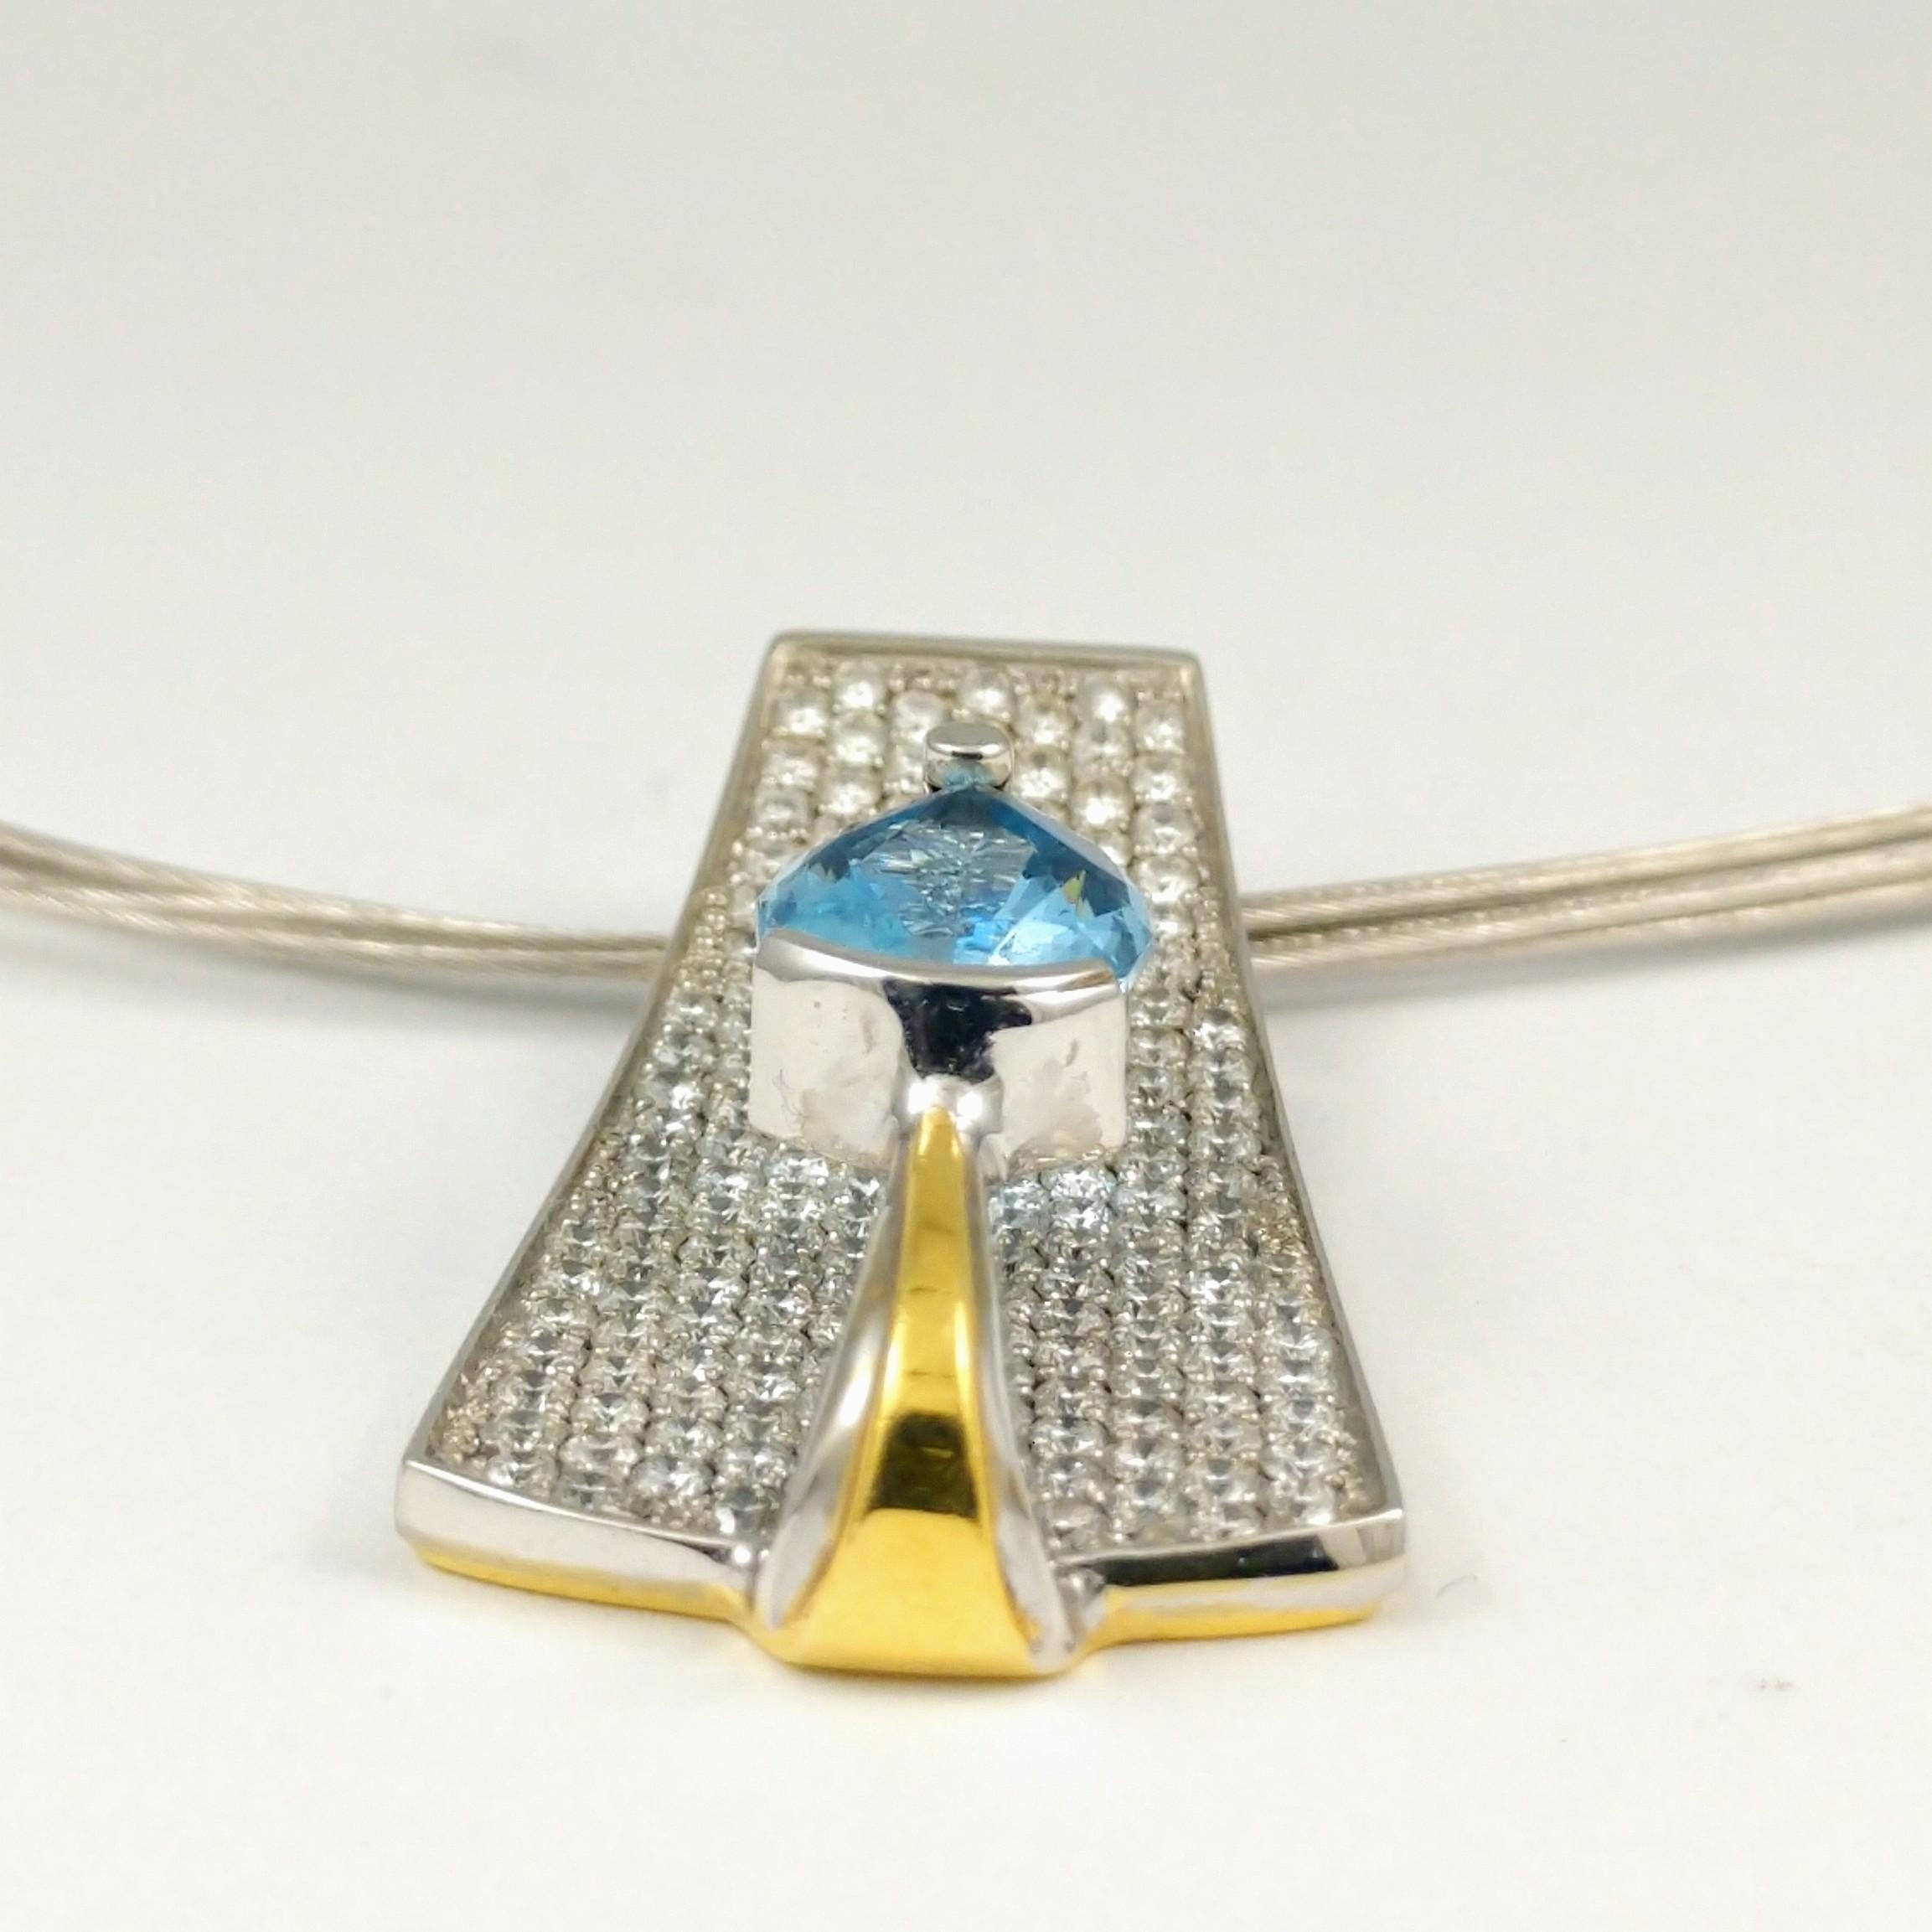 Aquamarine Drop Necklace 18K White & Yellow Gold with Pave Diamonds Contemporary For Sale 2